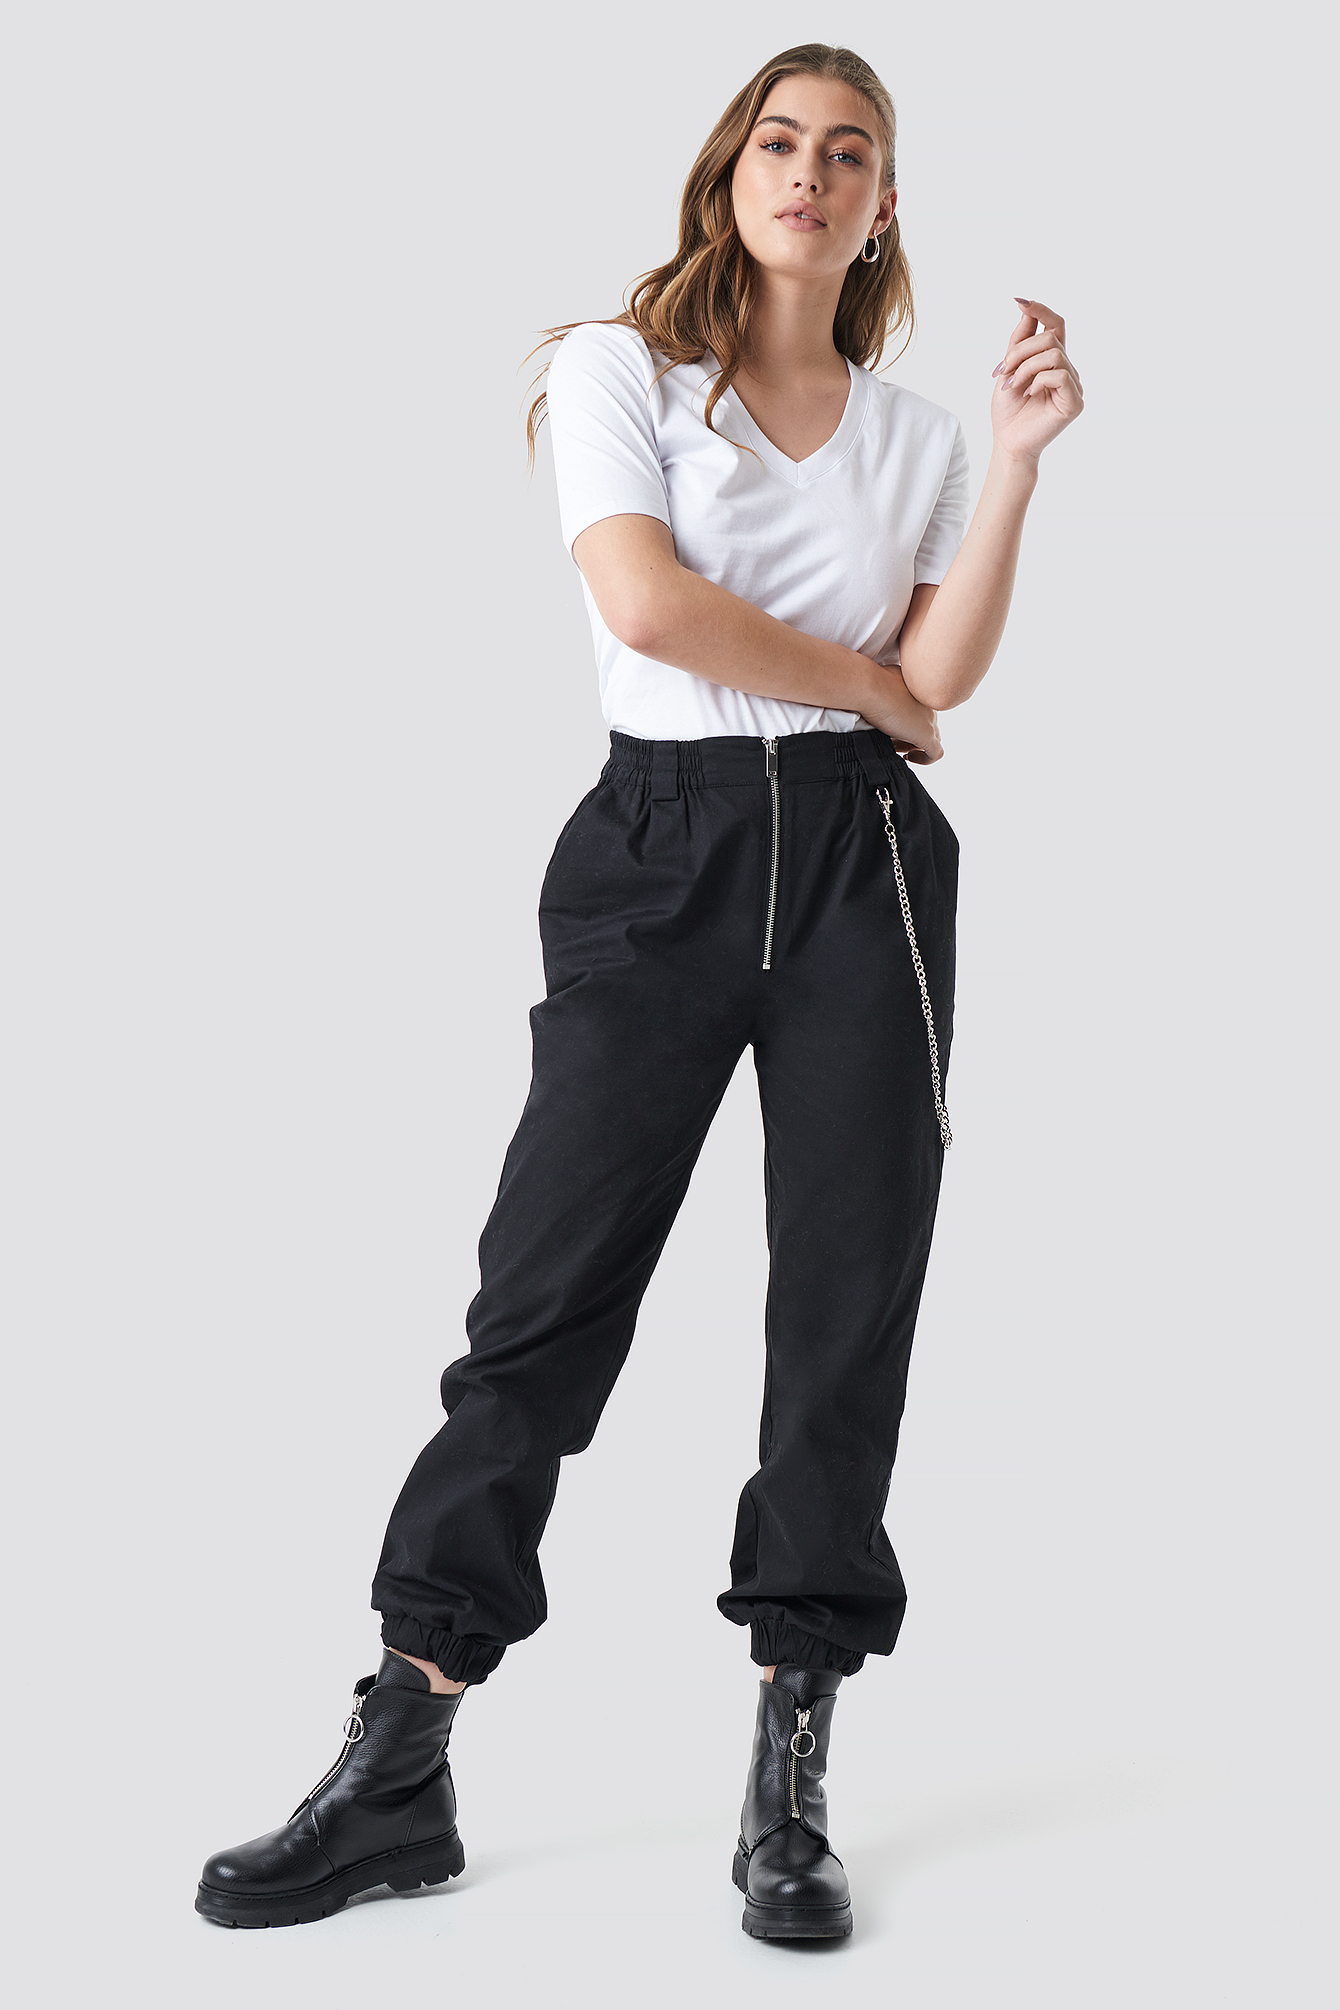 Donnaromina X Na-kd Front Zip Chain Detailed Pants - Black Https://www.na-kd.com/poqcolorimages/black.png